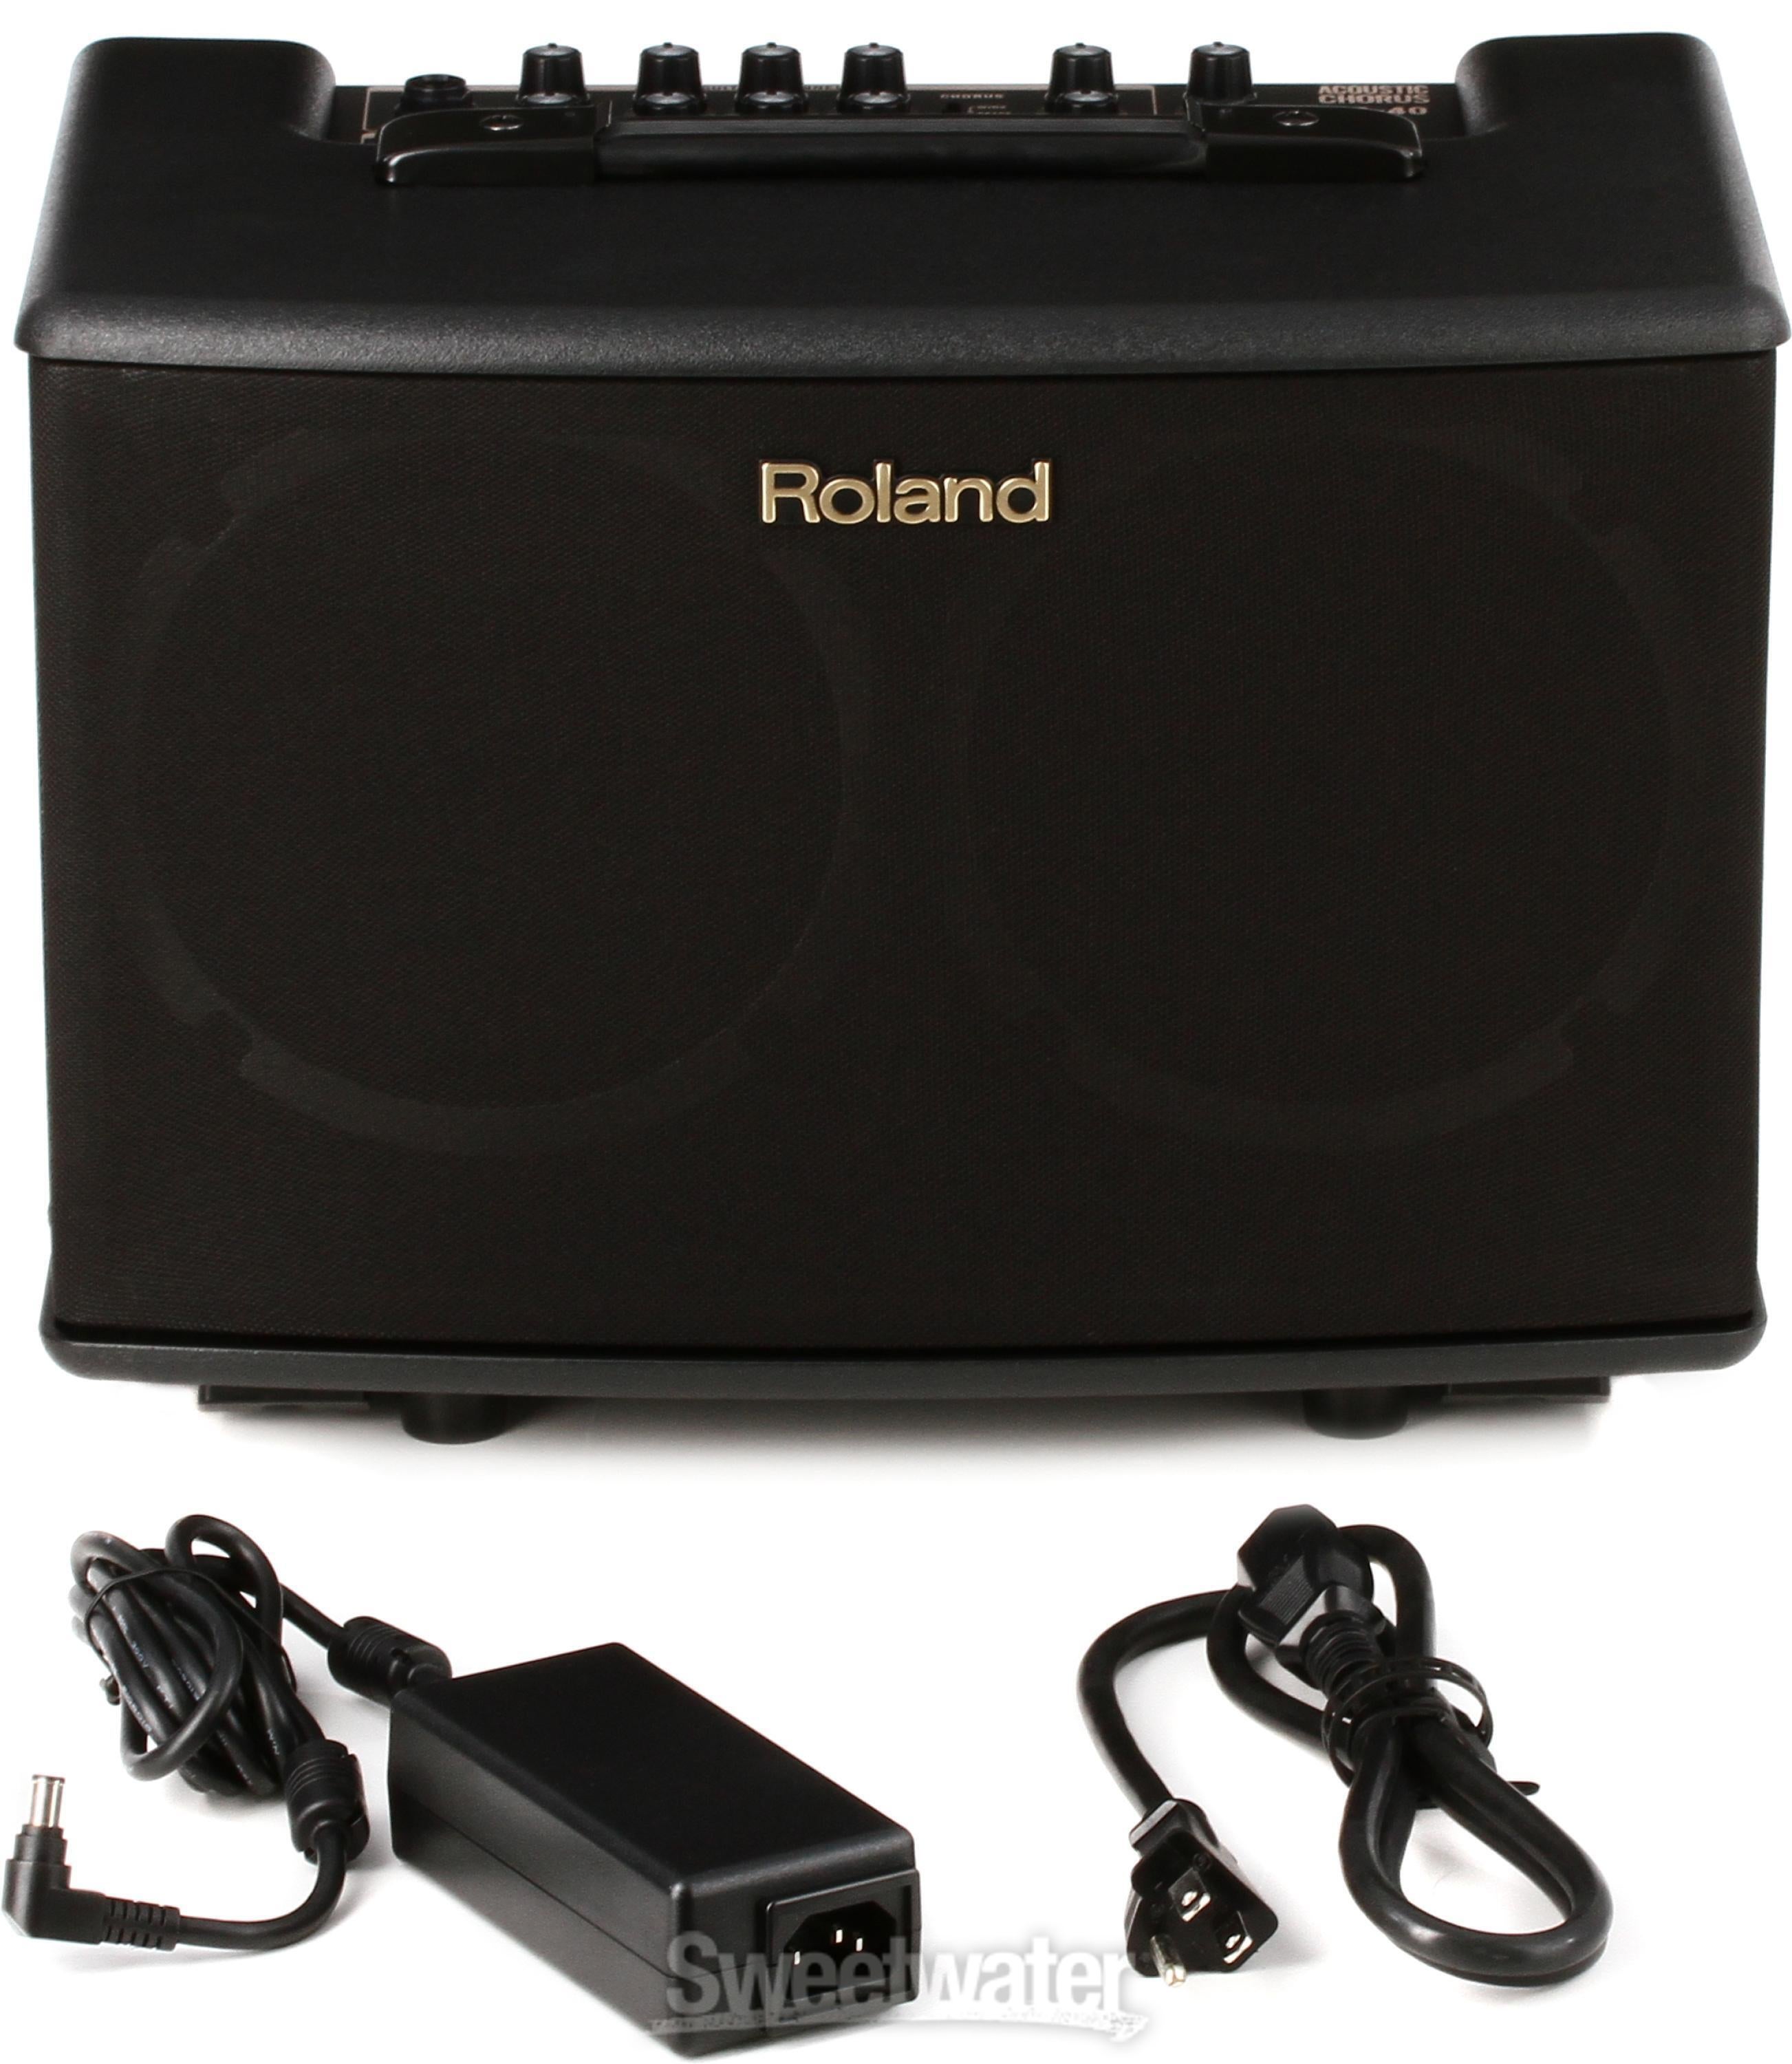 Roland AC-40 - 35-watt 2x6.5 Acoustic Amp Reviews | Sweetwater